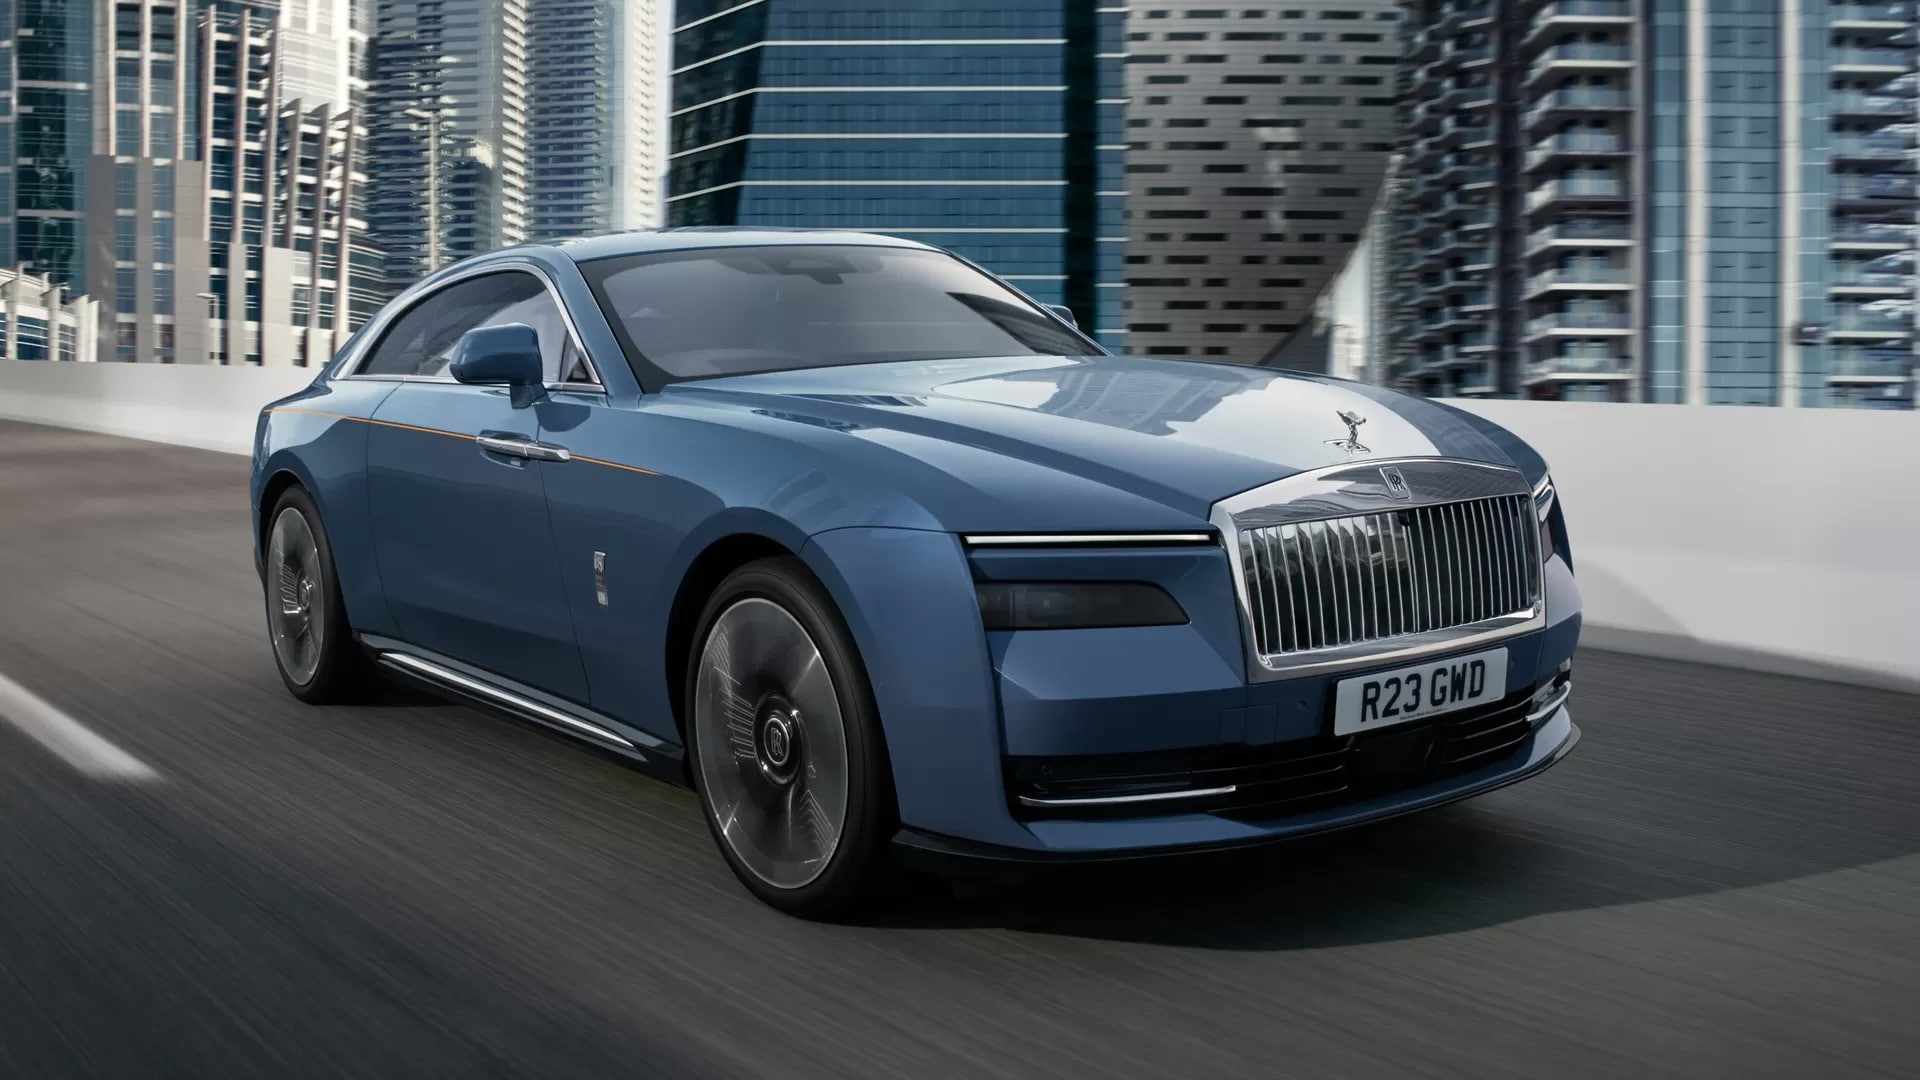 Electric Rolls-Royce Spectre revealed: everything we know so far